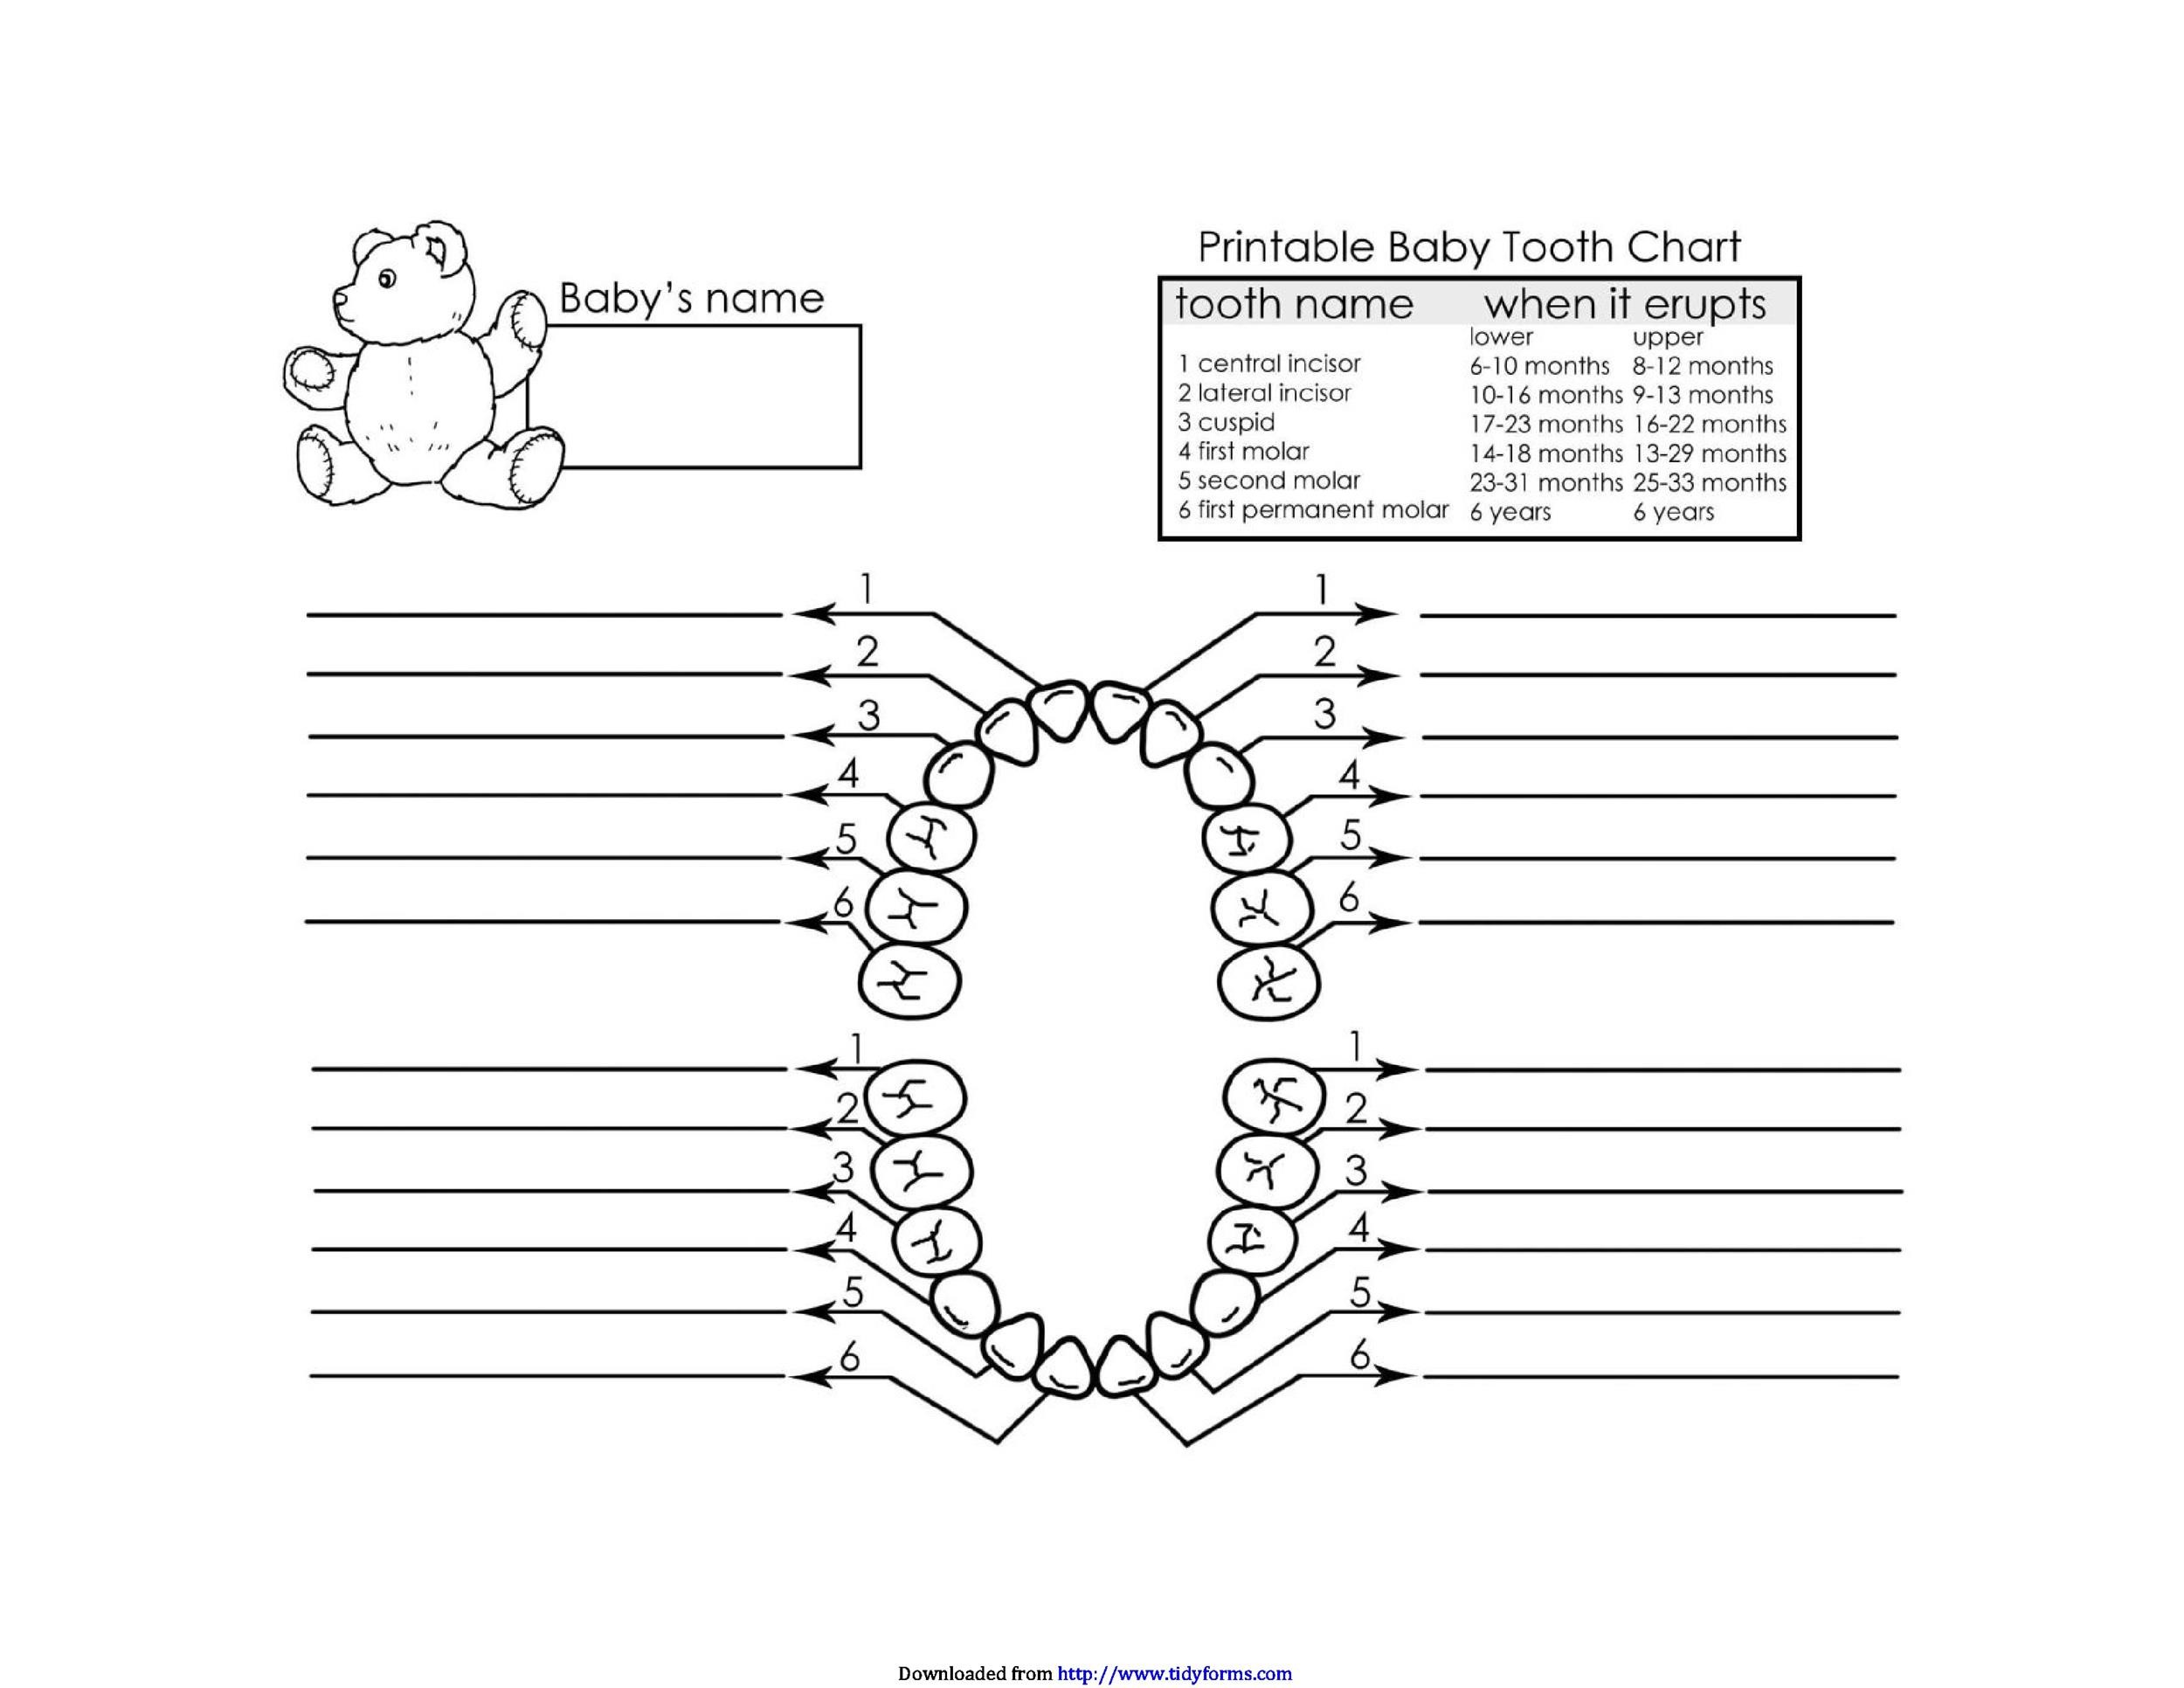 Downloadable Printable Dental Charting Forms Master of